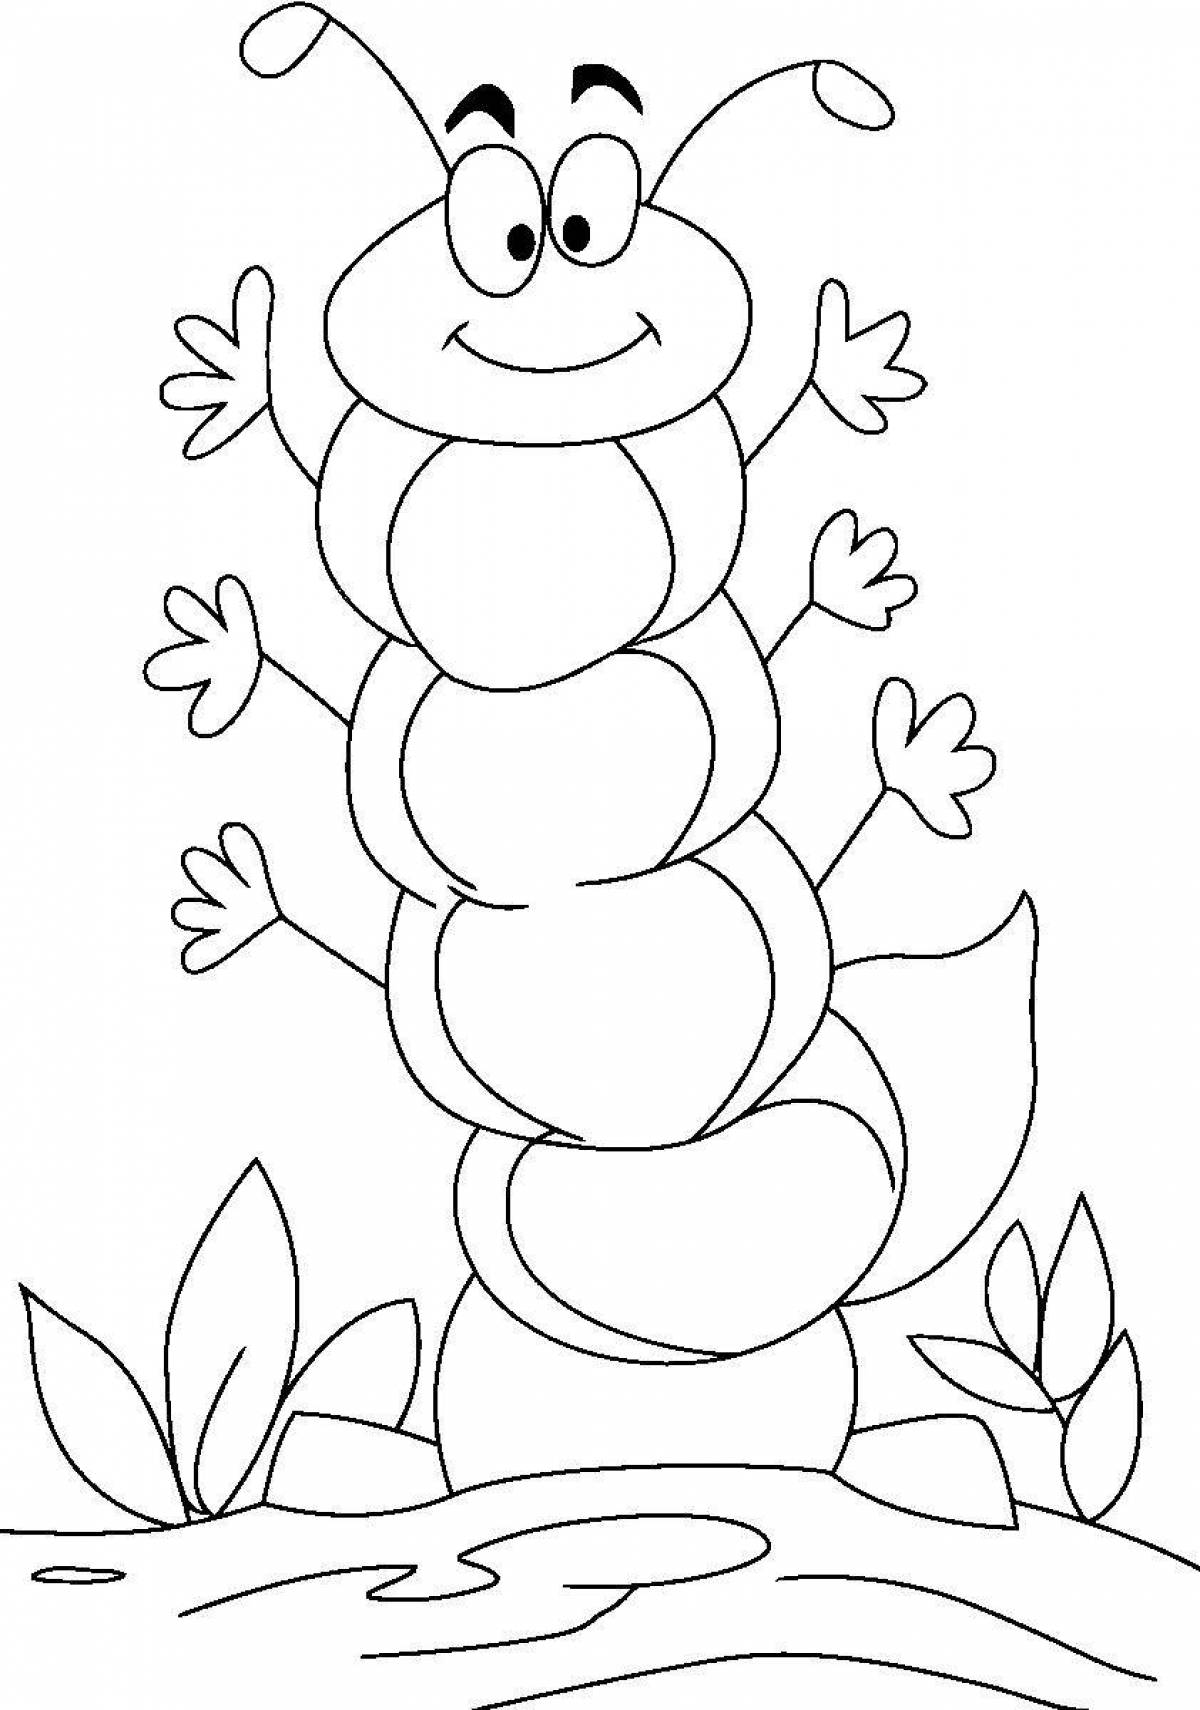 Colorful caterpillar coloring page for pre-k